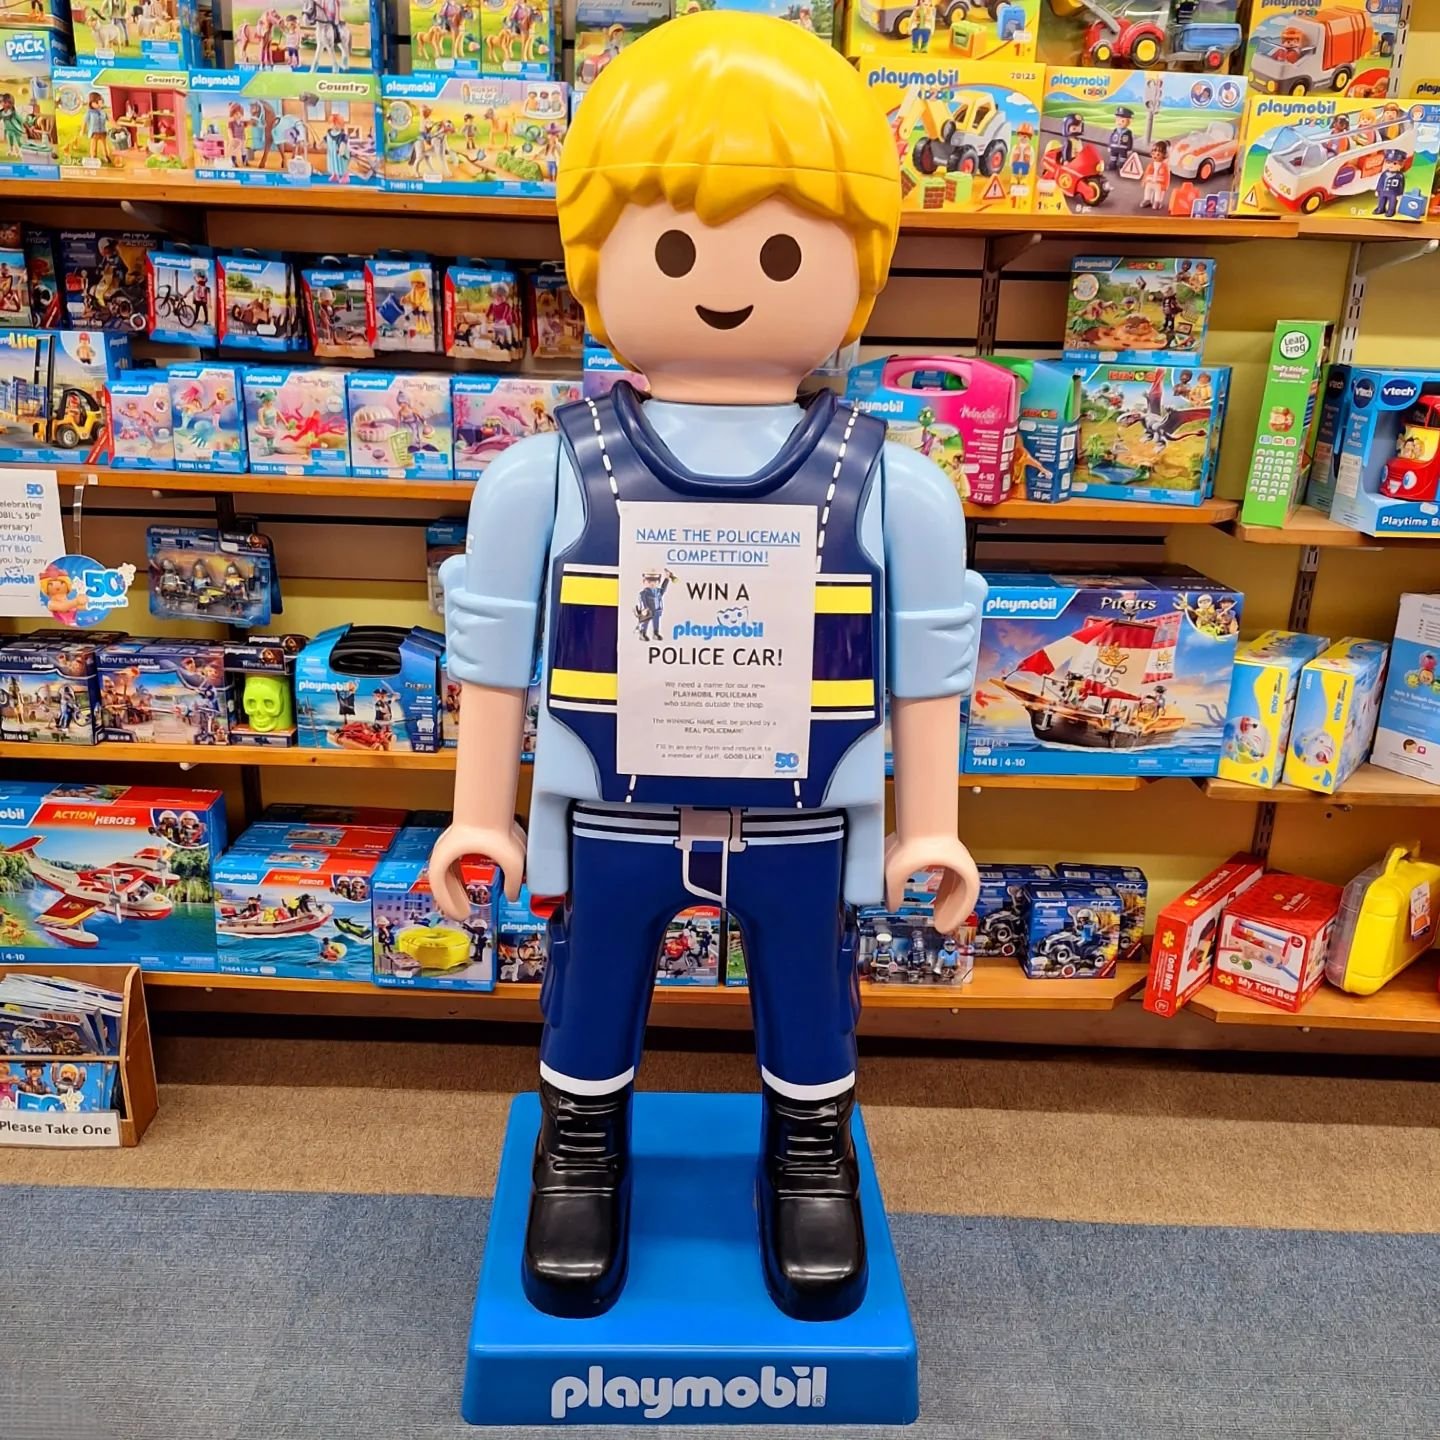 👮Have you entered our PLAYMOBIL COMPETITION yet?👮

To celebrate PLAYMOBIL'S 50th anniversary we have a PLAYMOBIL POLICE CAR to be won, all you have to do, is think of a NAME for our new PLAYMOBIL POLICEMAN!

Pop in store, pick up an entry form and 